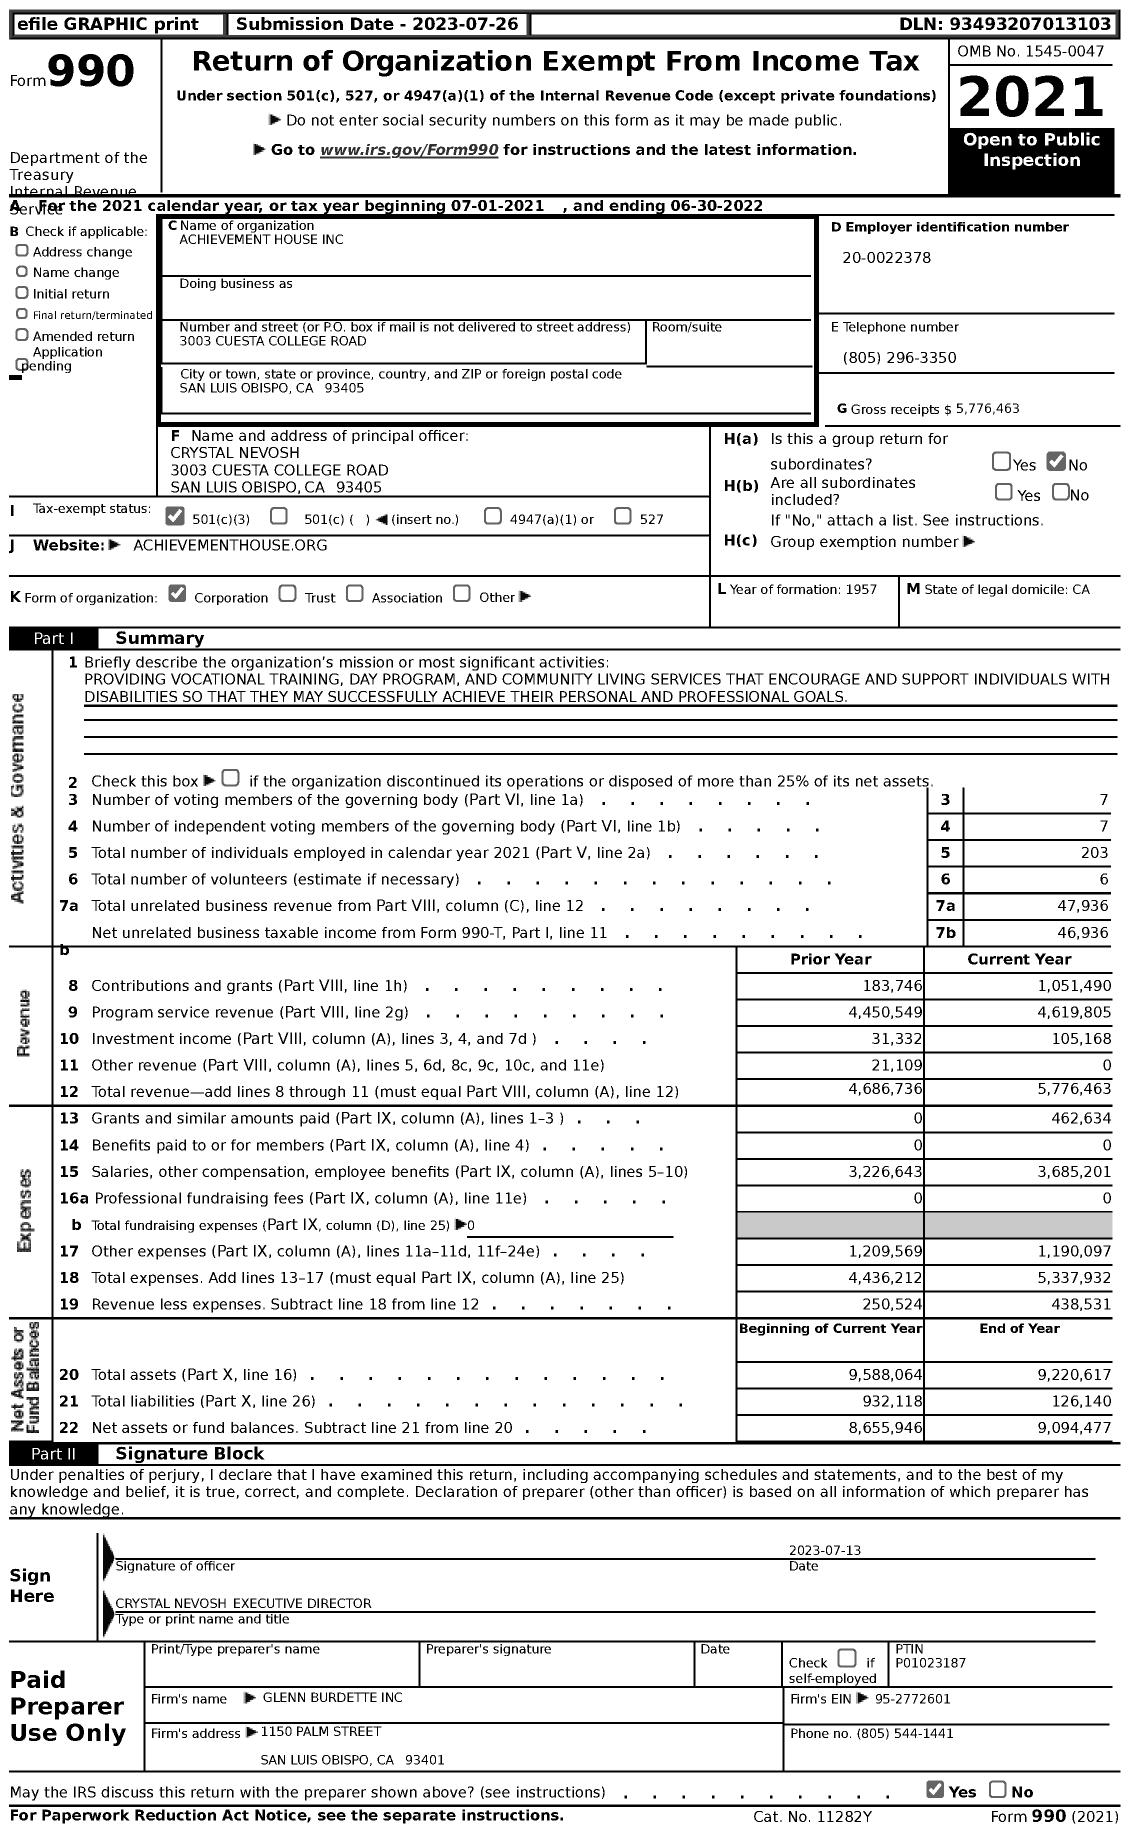 Image of first page of 2021 Form 990 for Achievement House Incorporated (AHI)